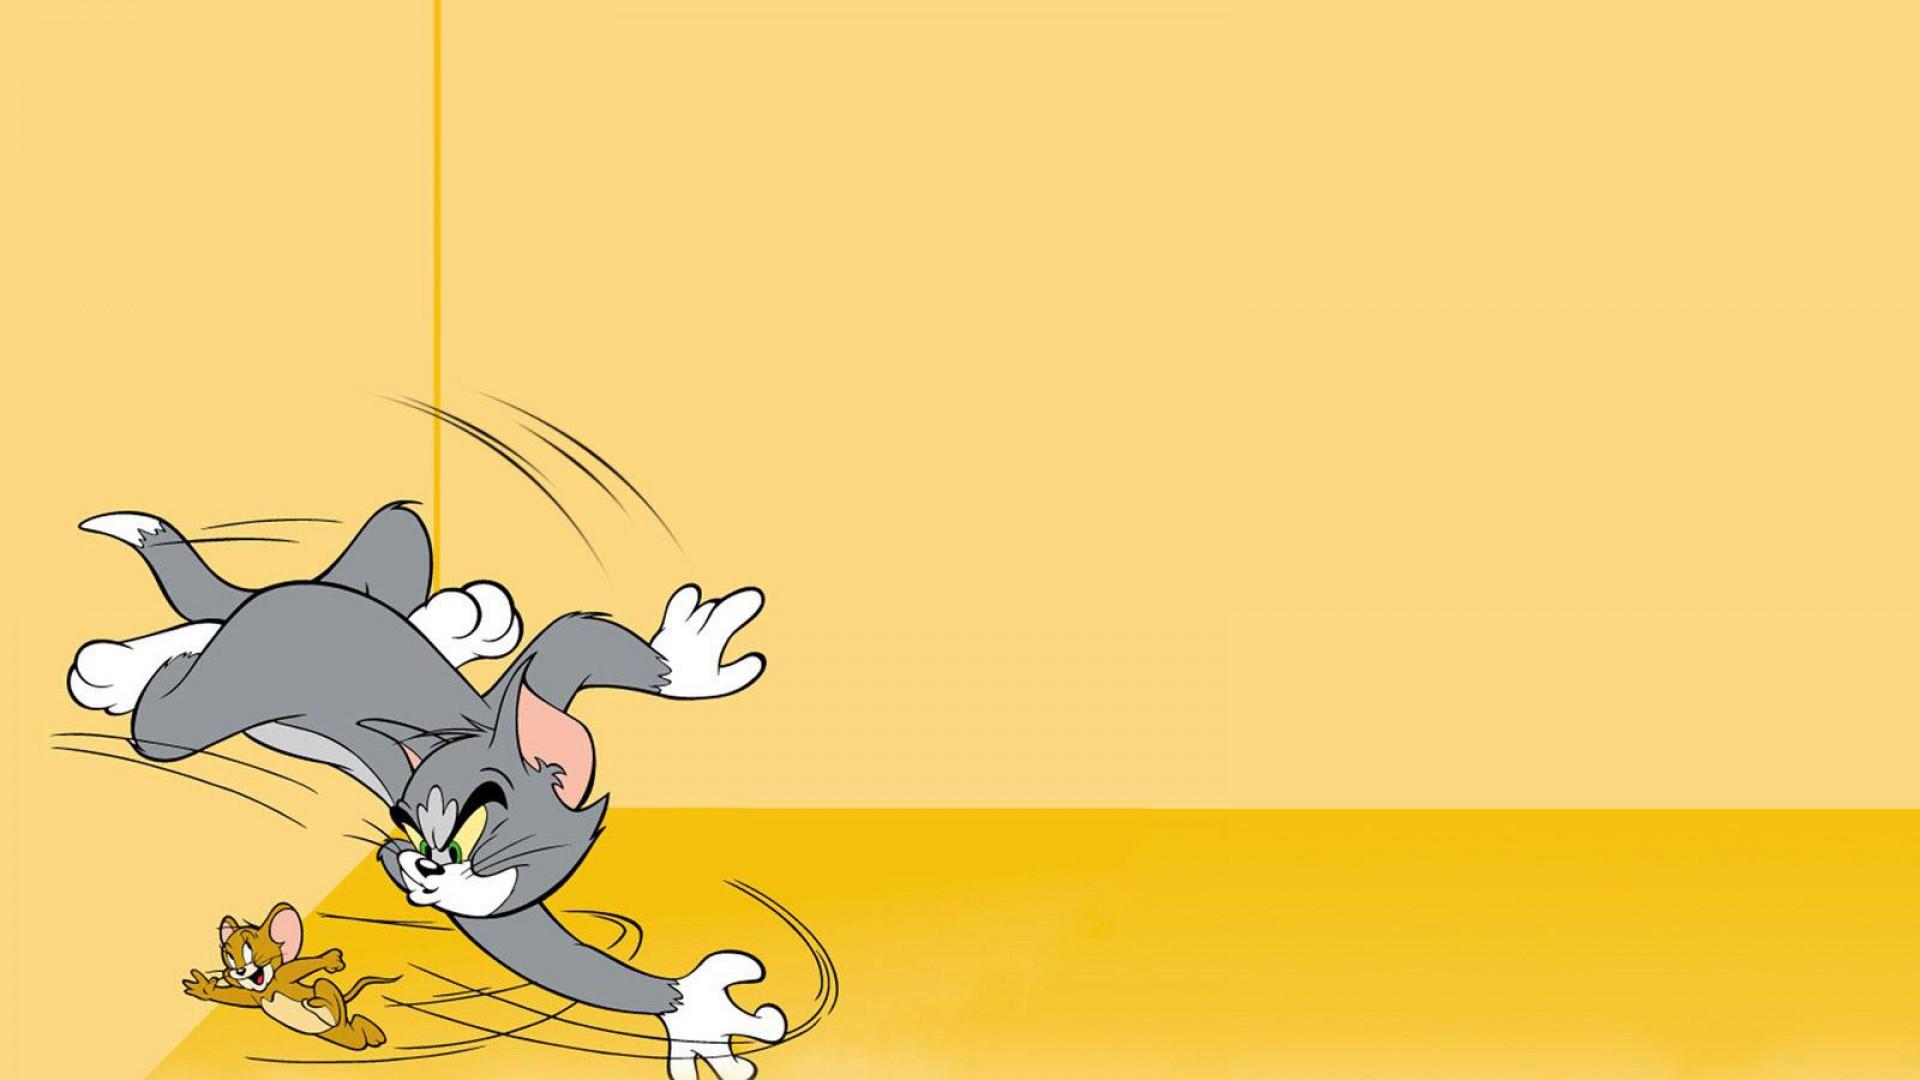 Tom and Jerry Desktop Background. Tom and Jerry Cartoon Wallpaper, Sweet Rides Custom Wallpaper and Tom and Jerry Wallpaper